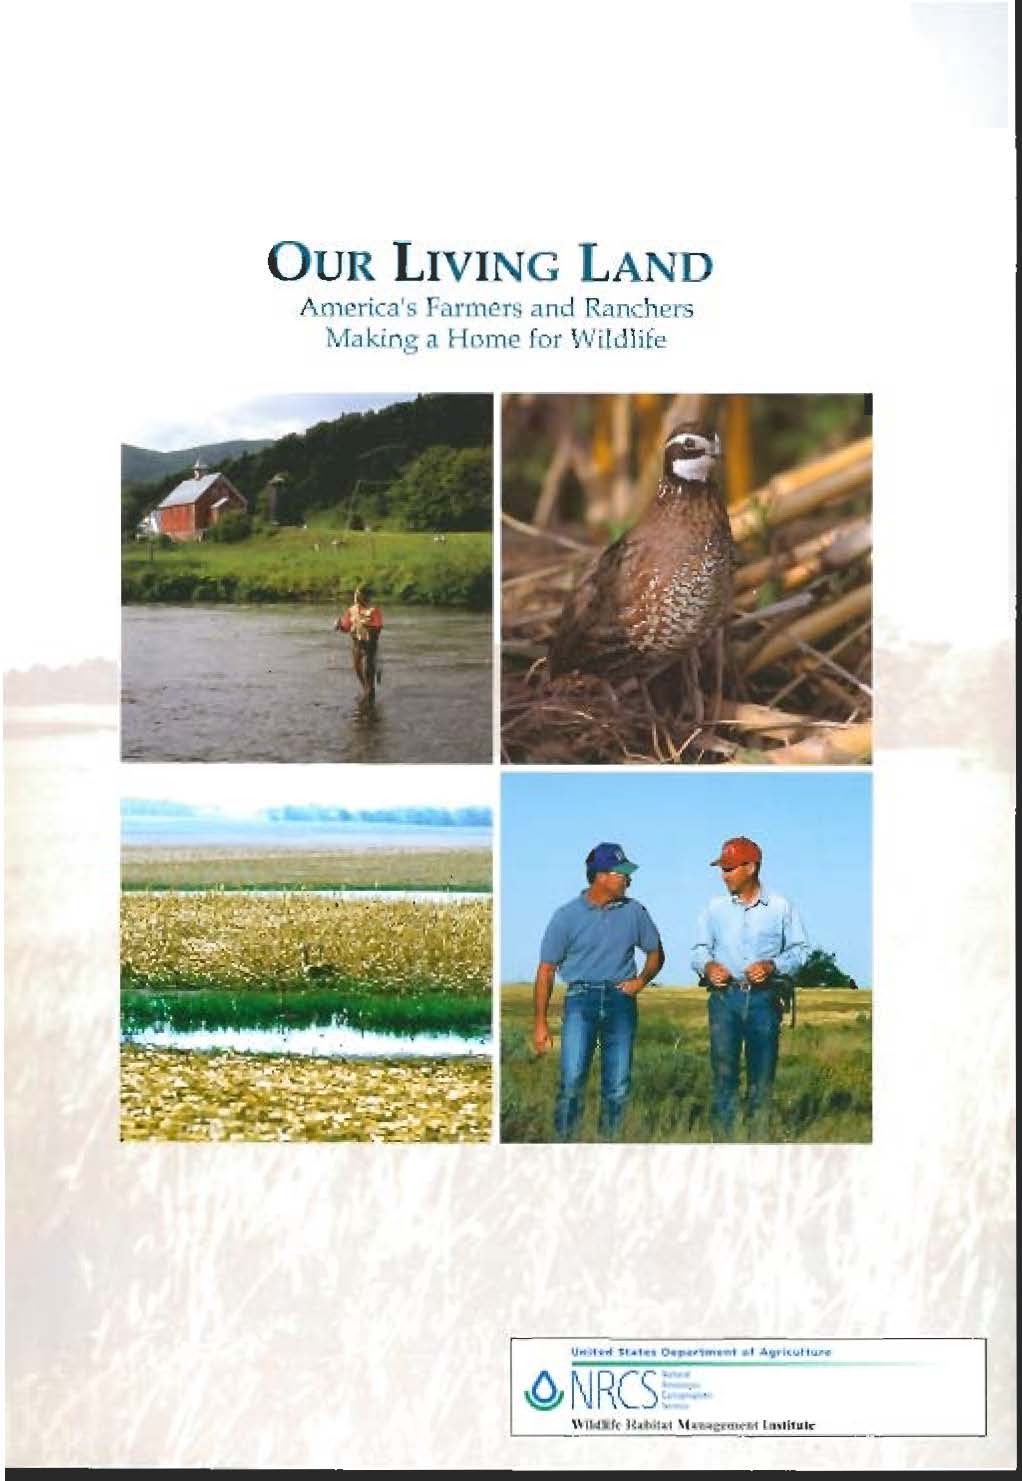 Our Living Land booklet